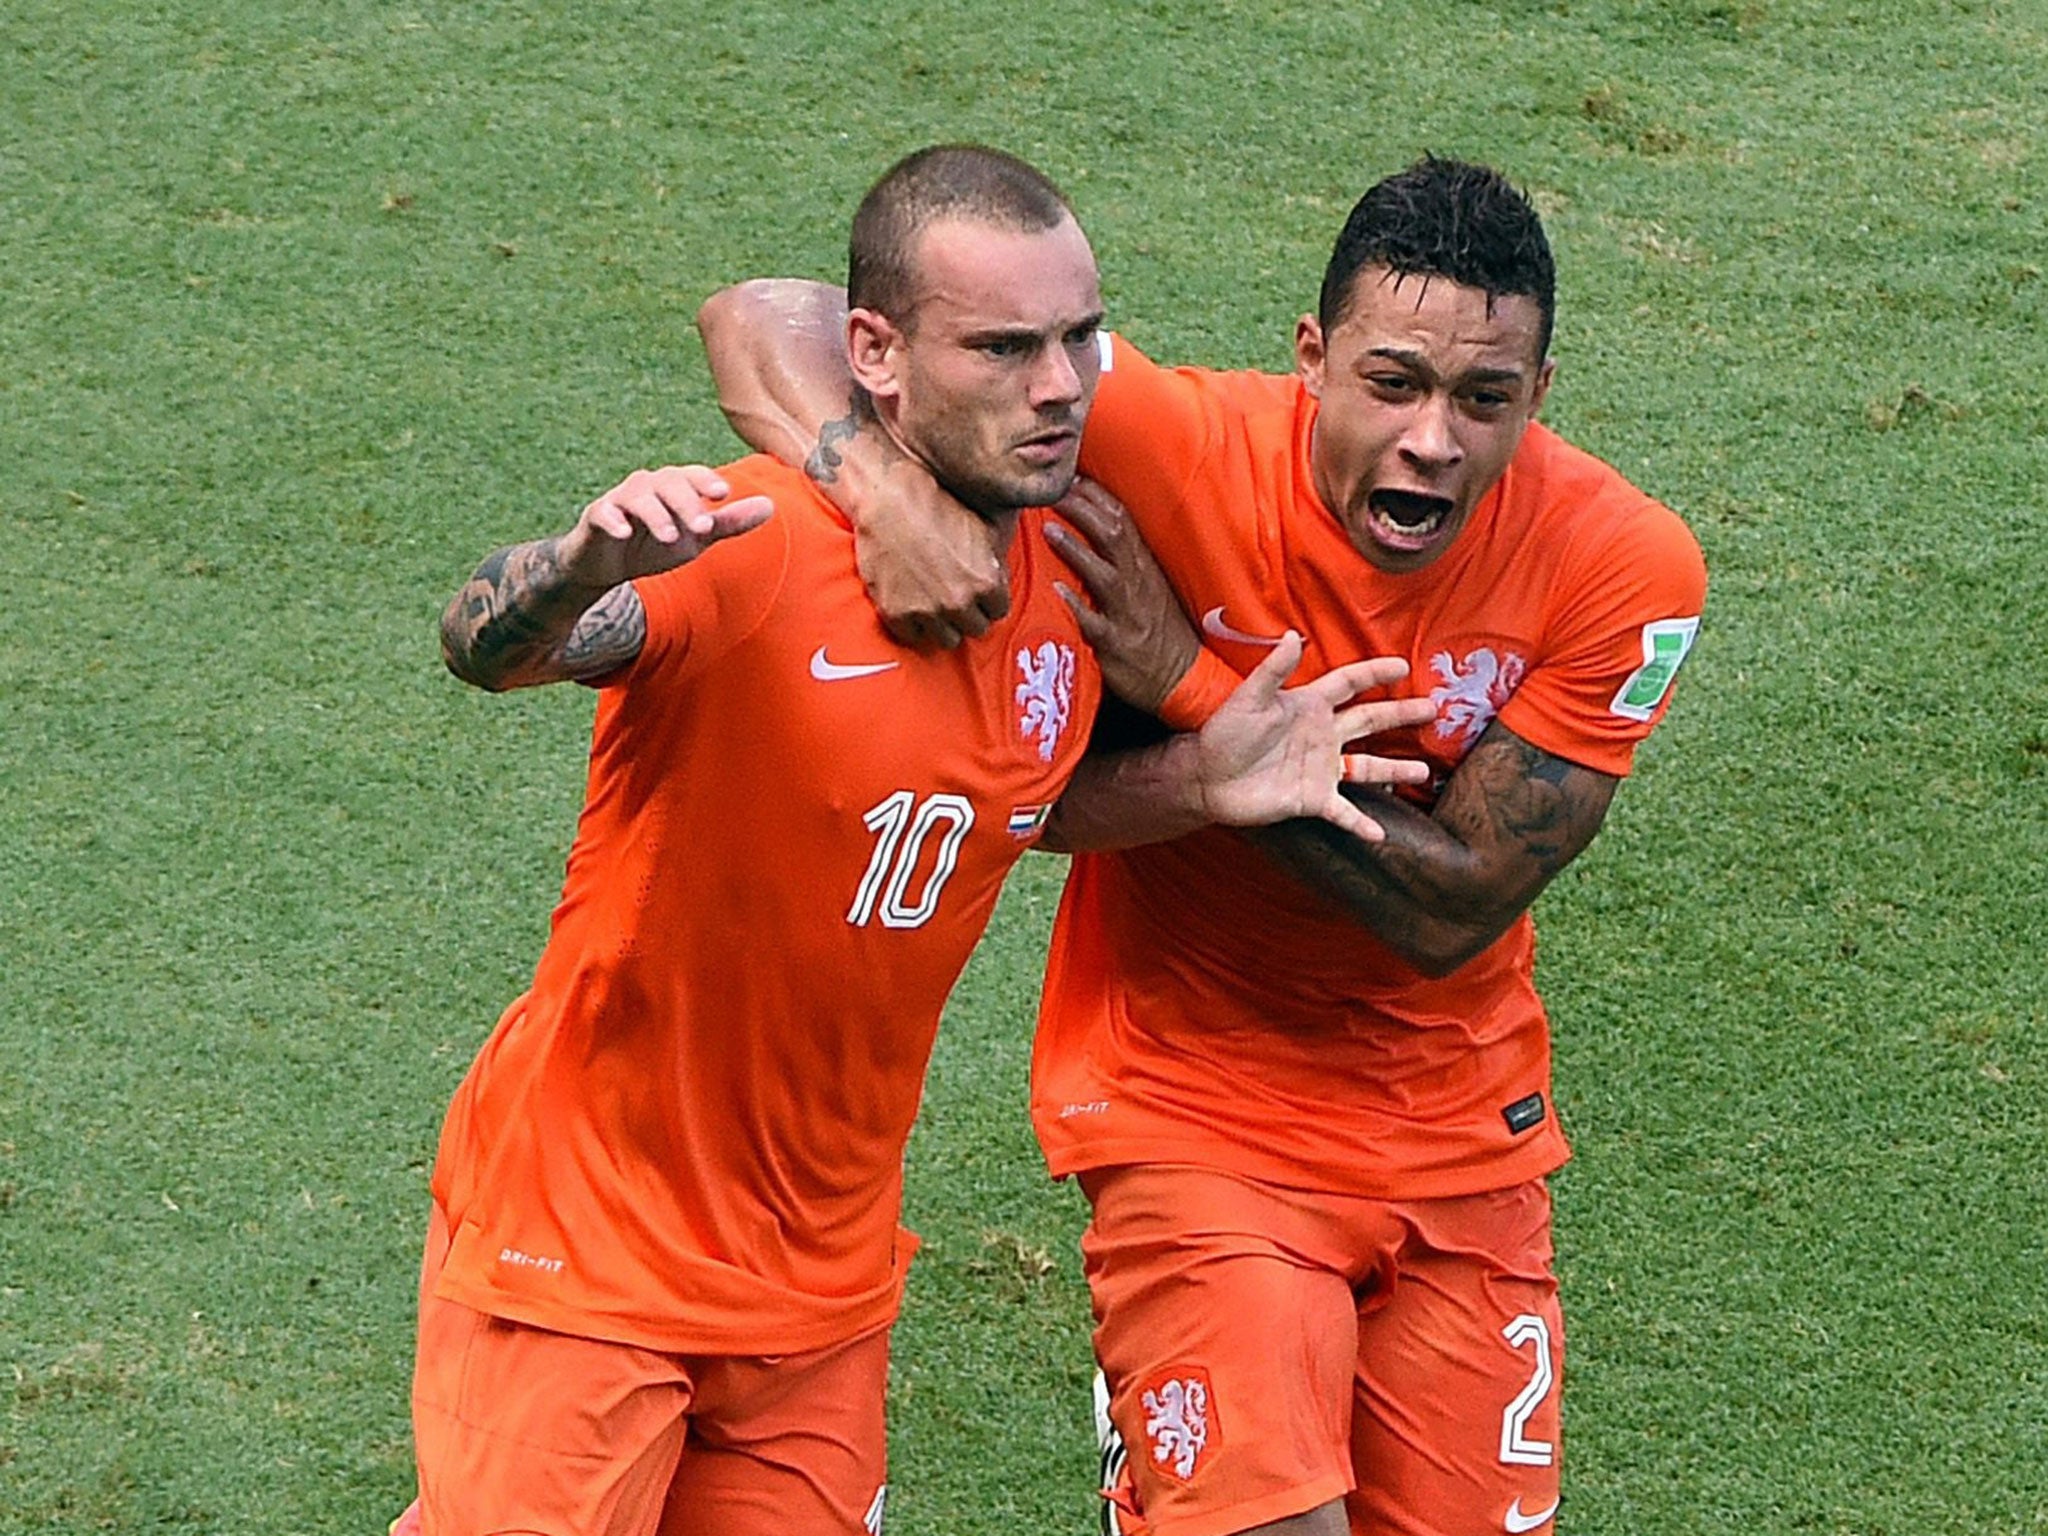 Memphis Depay, pictured on the right next
to Wesley Sneijder